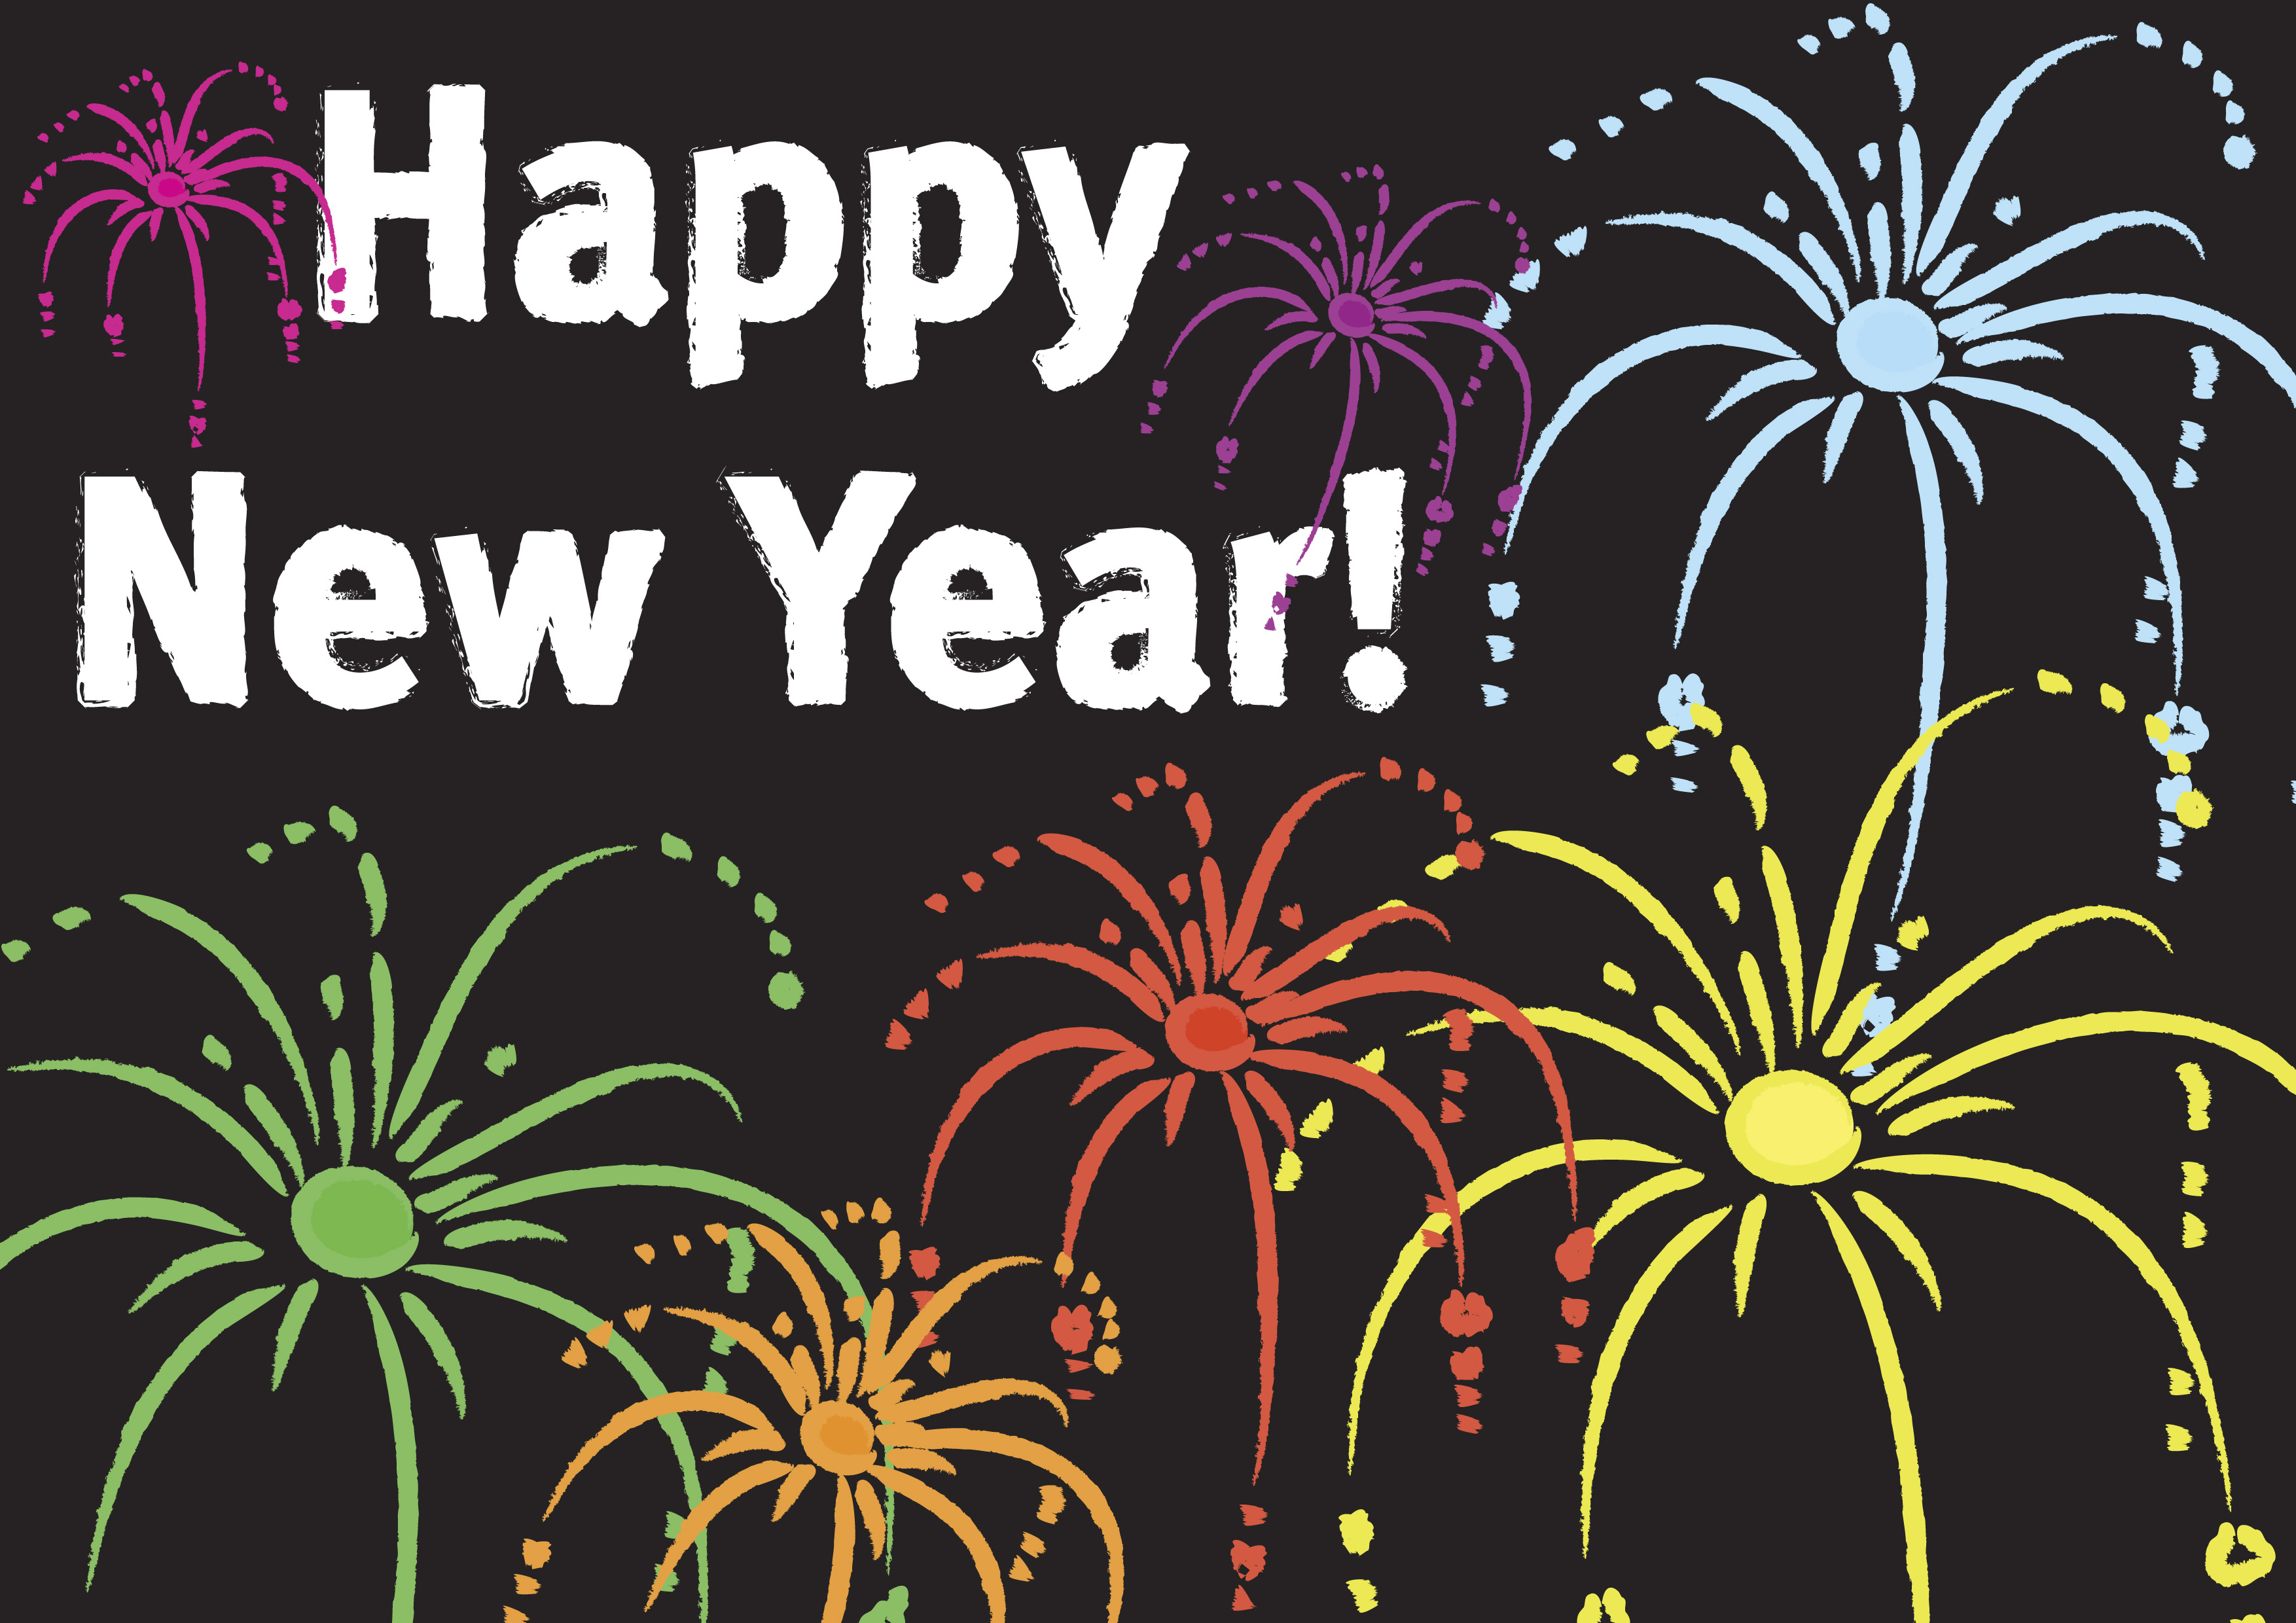 New Year Morning Reads – 1/1/15 – Happy New Year Edition